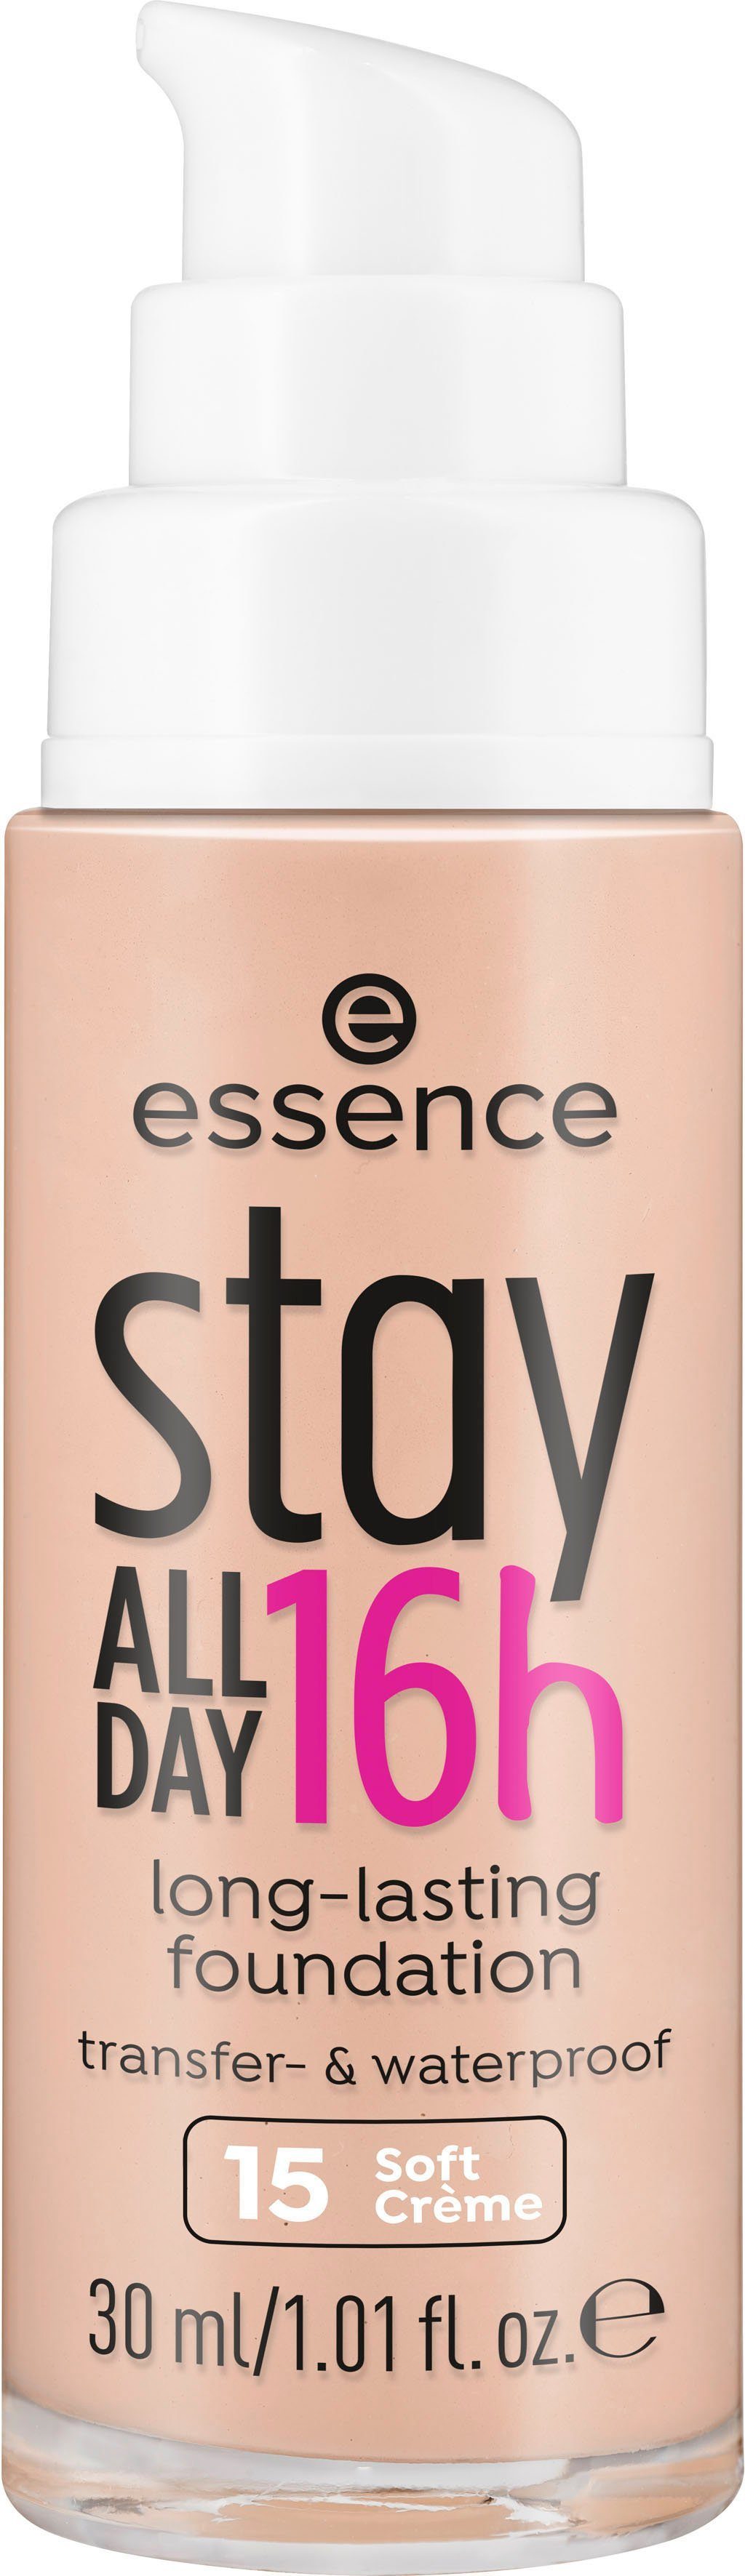 Essence Foundation stay 3-tlg. Creme Soft long-lasting, ALL 16h DAY